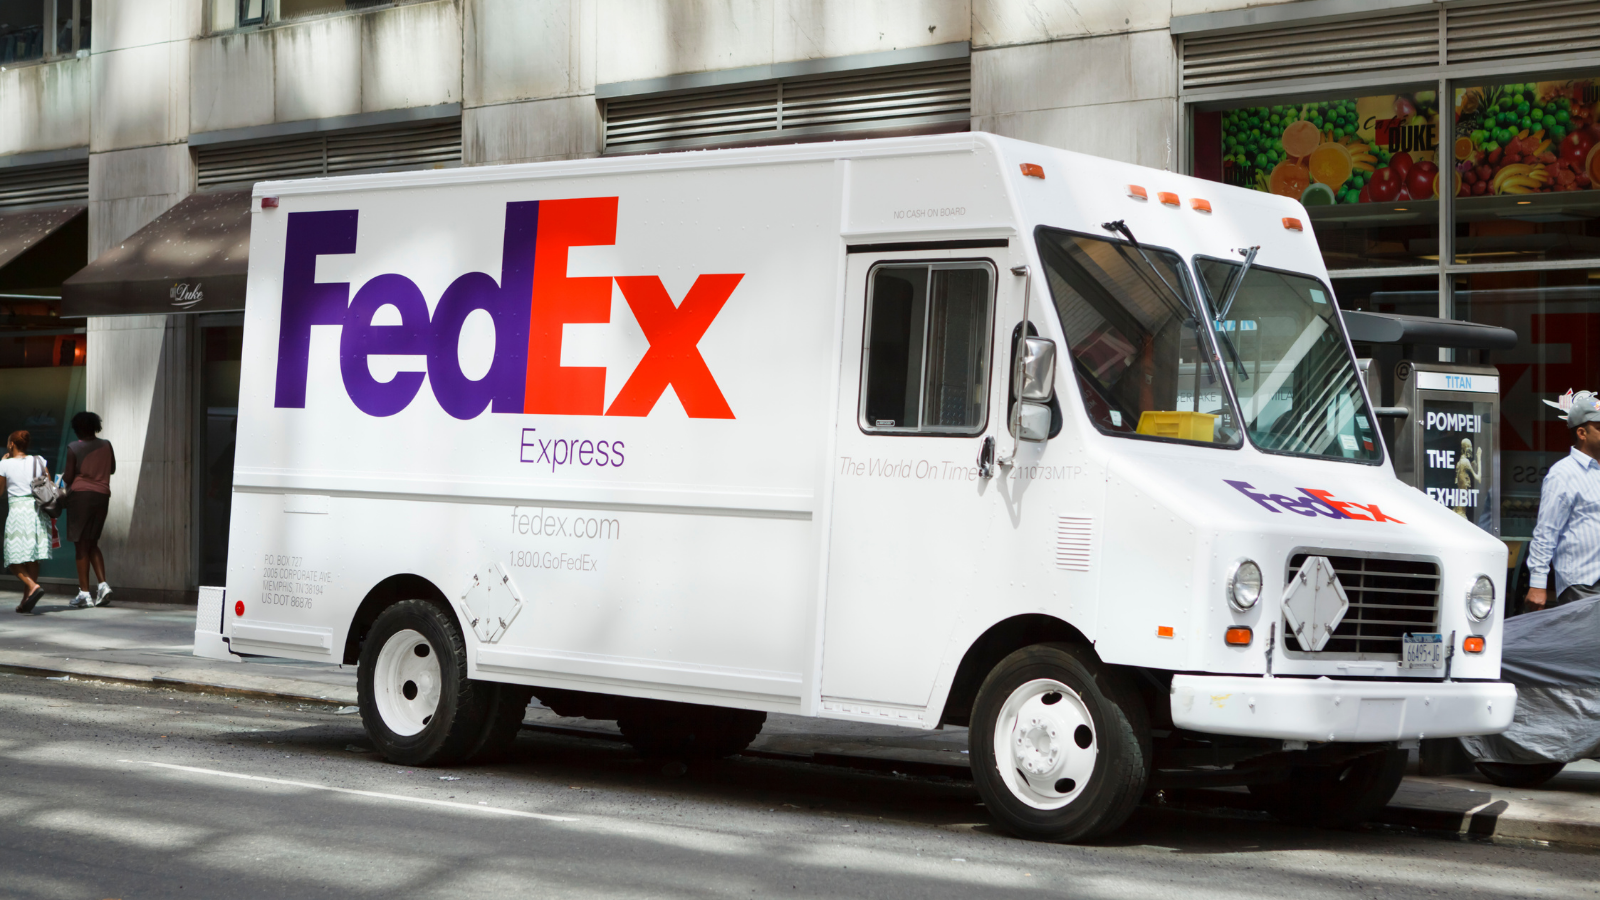 Ship&co now fully supports FedEx®International
Connect Plus